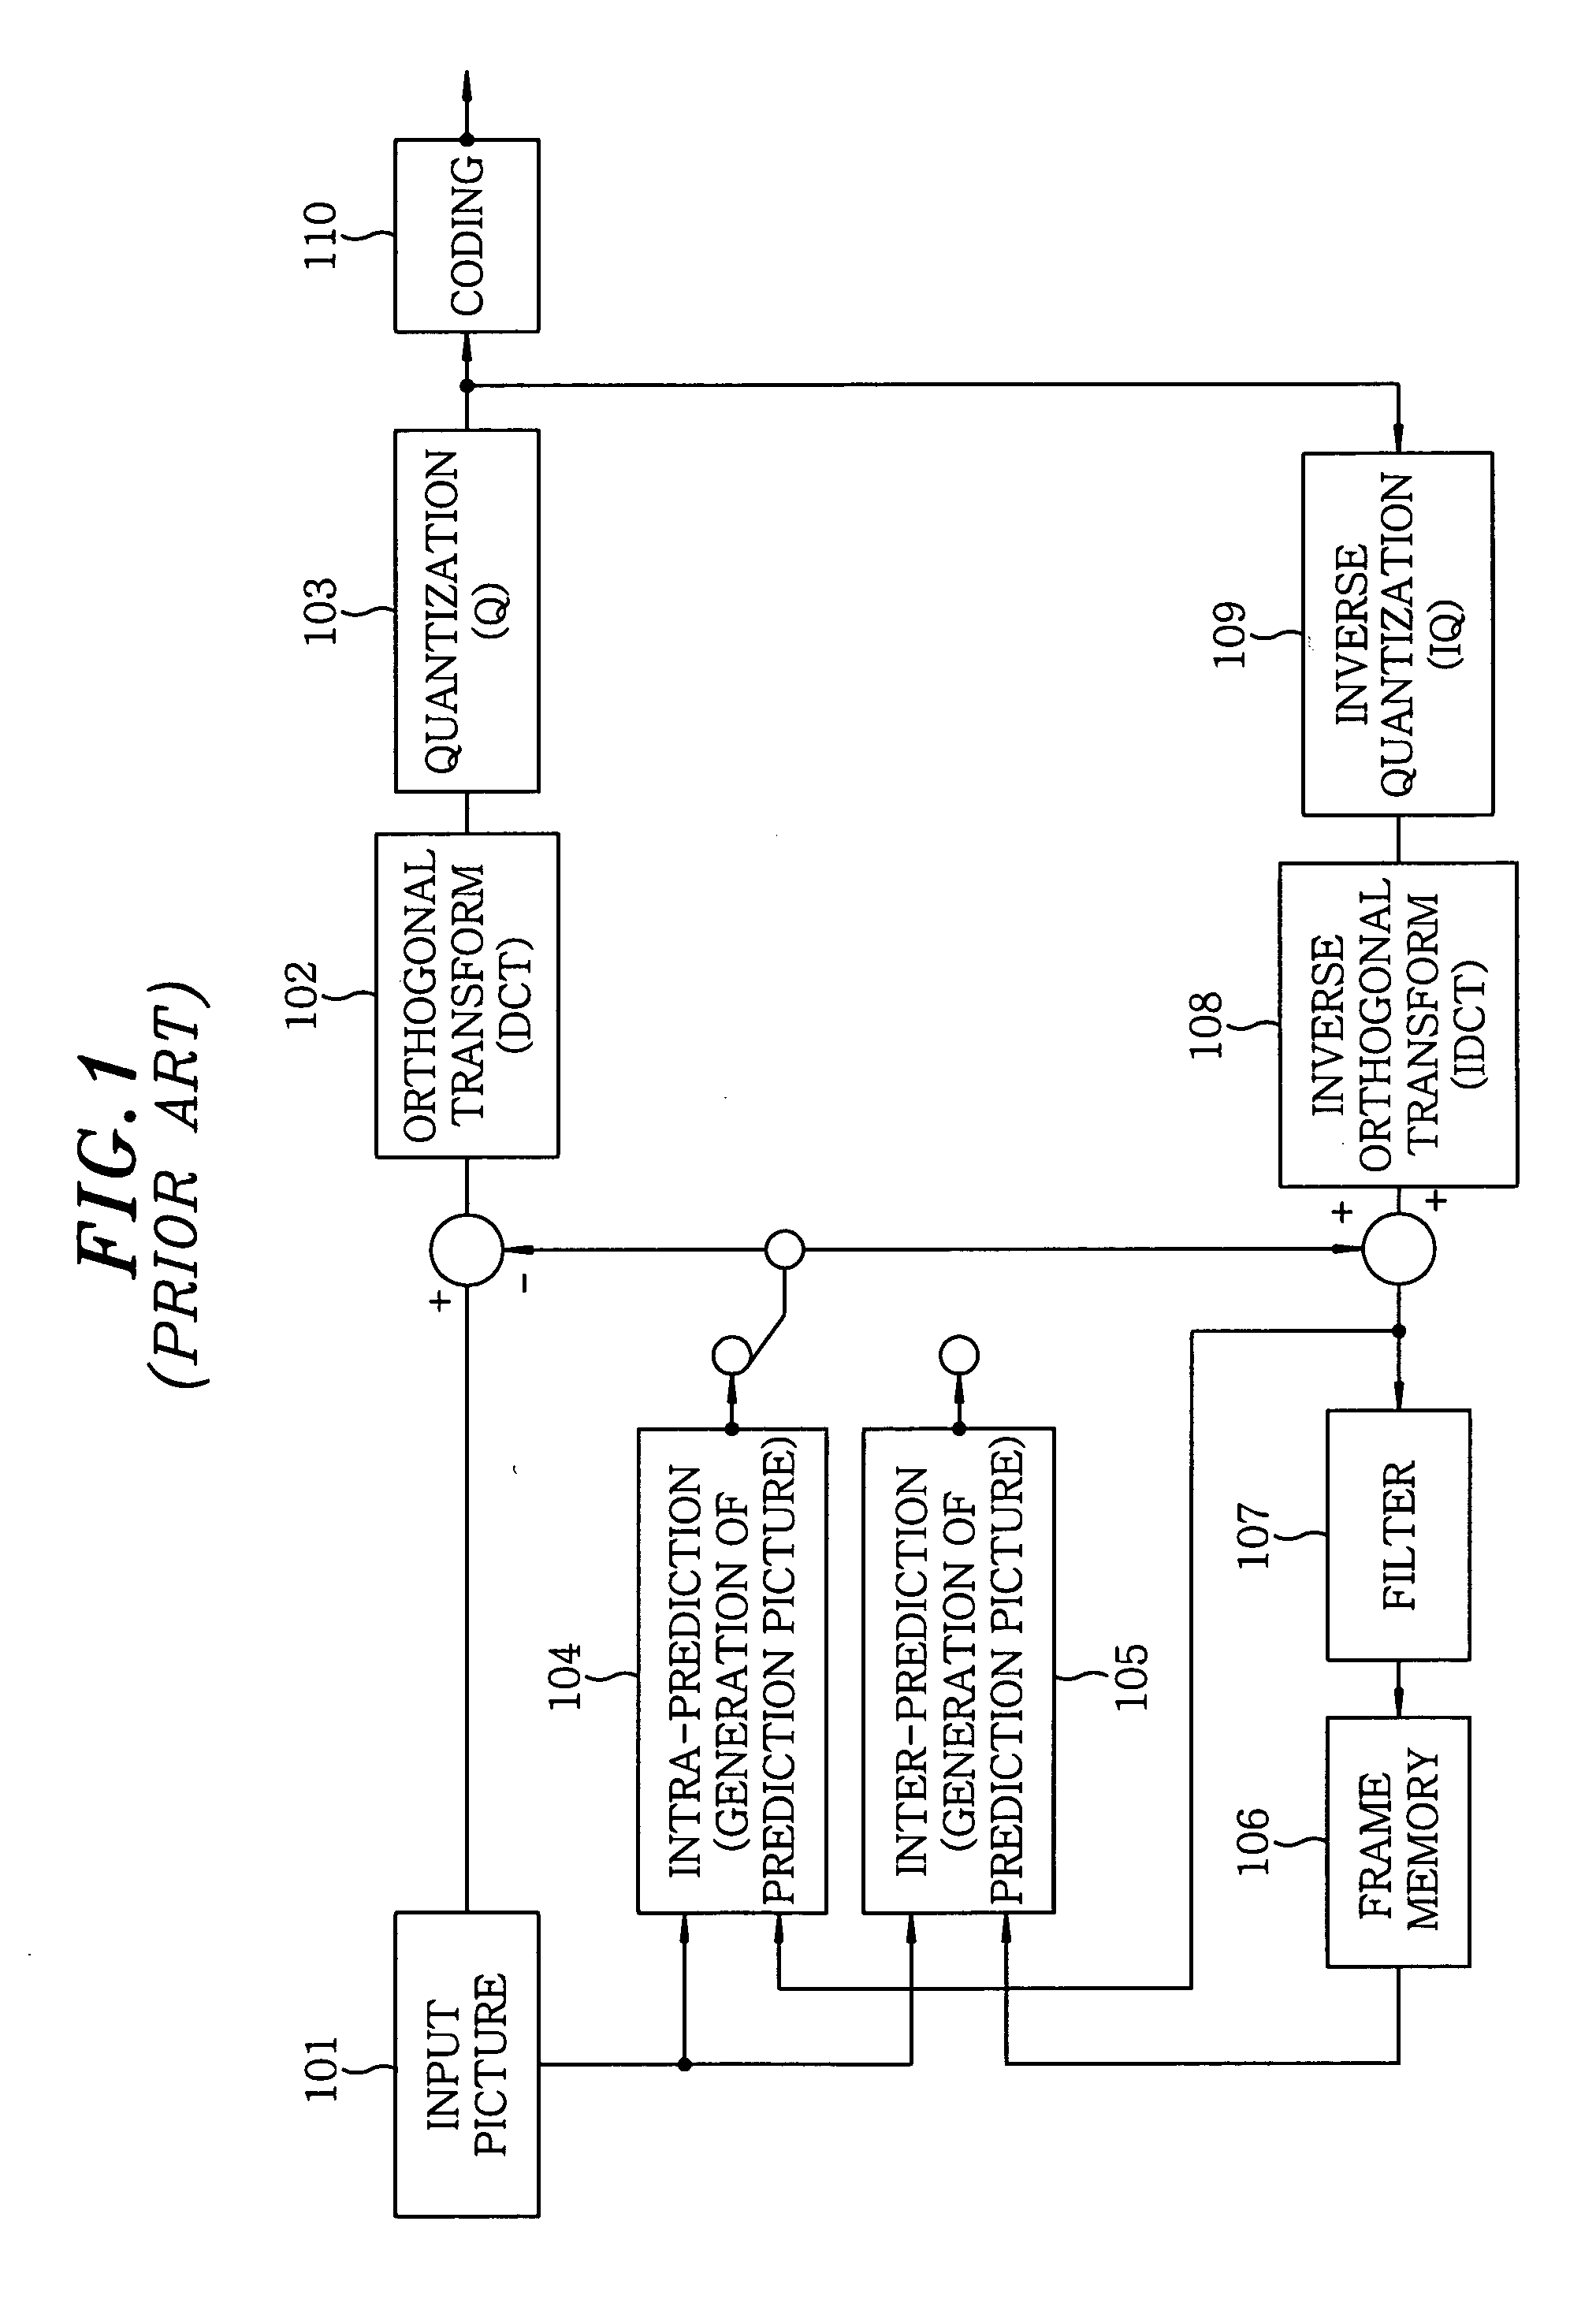 Moving picture coding apparatus